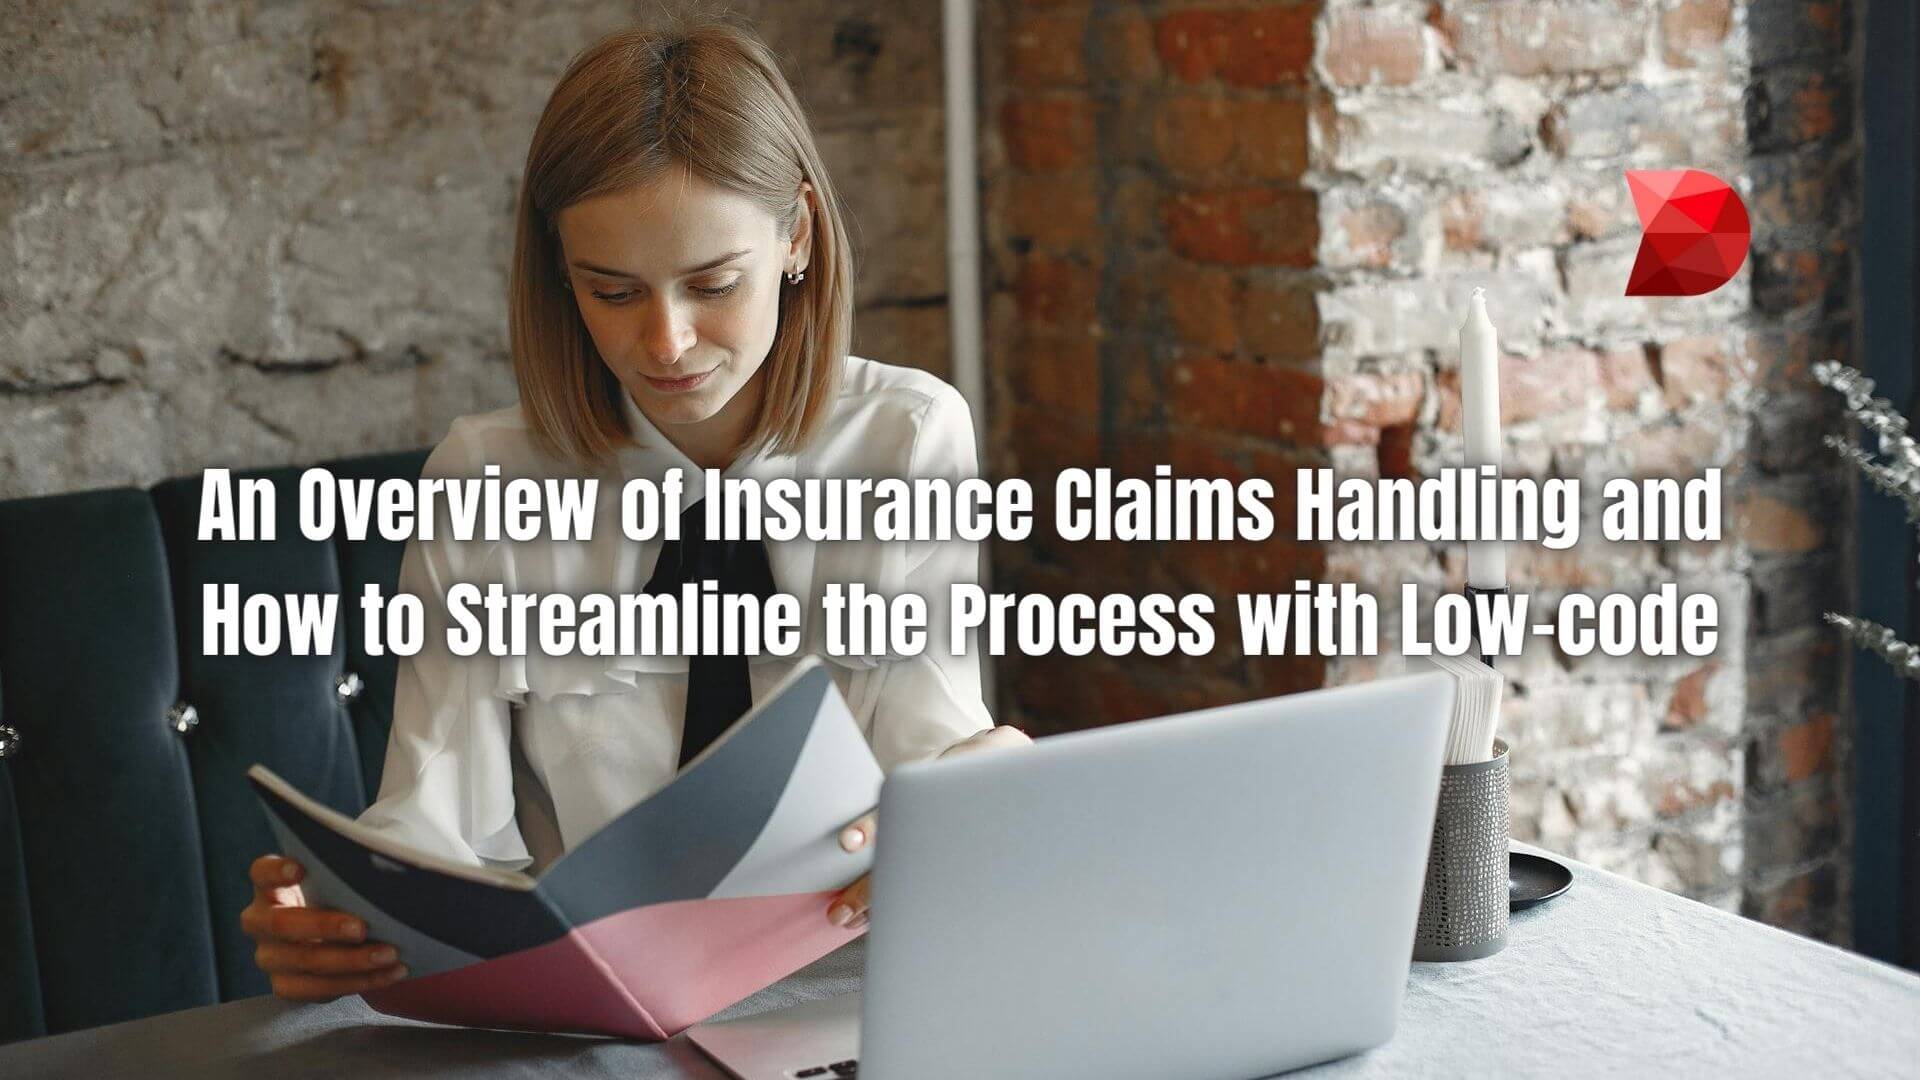 Optimize insurance claims handling process with ease! Click here to learn how to leverage low-code solutions for streamlined processes.